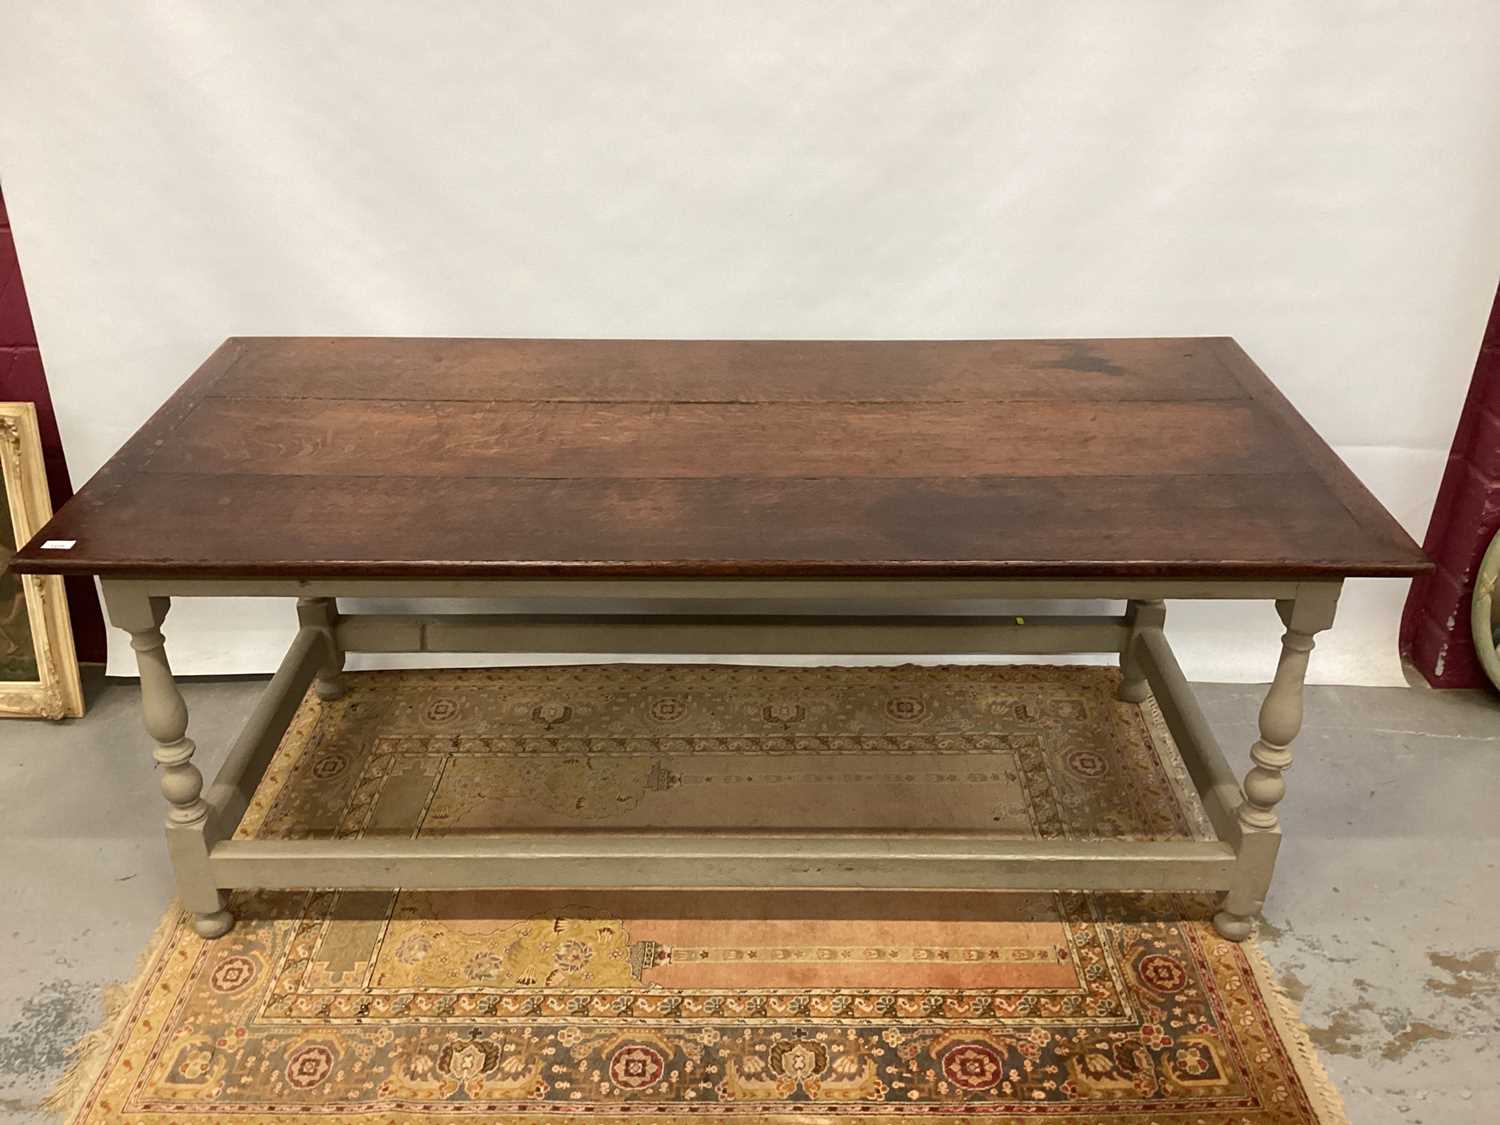 Antique country kitchen table with oak top and painted base